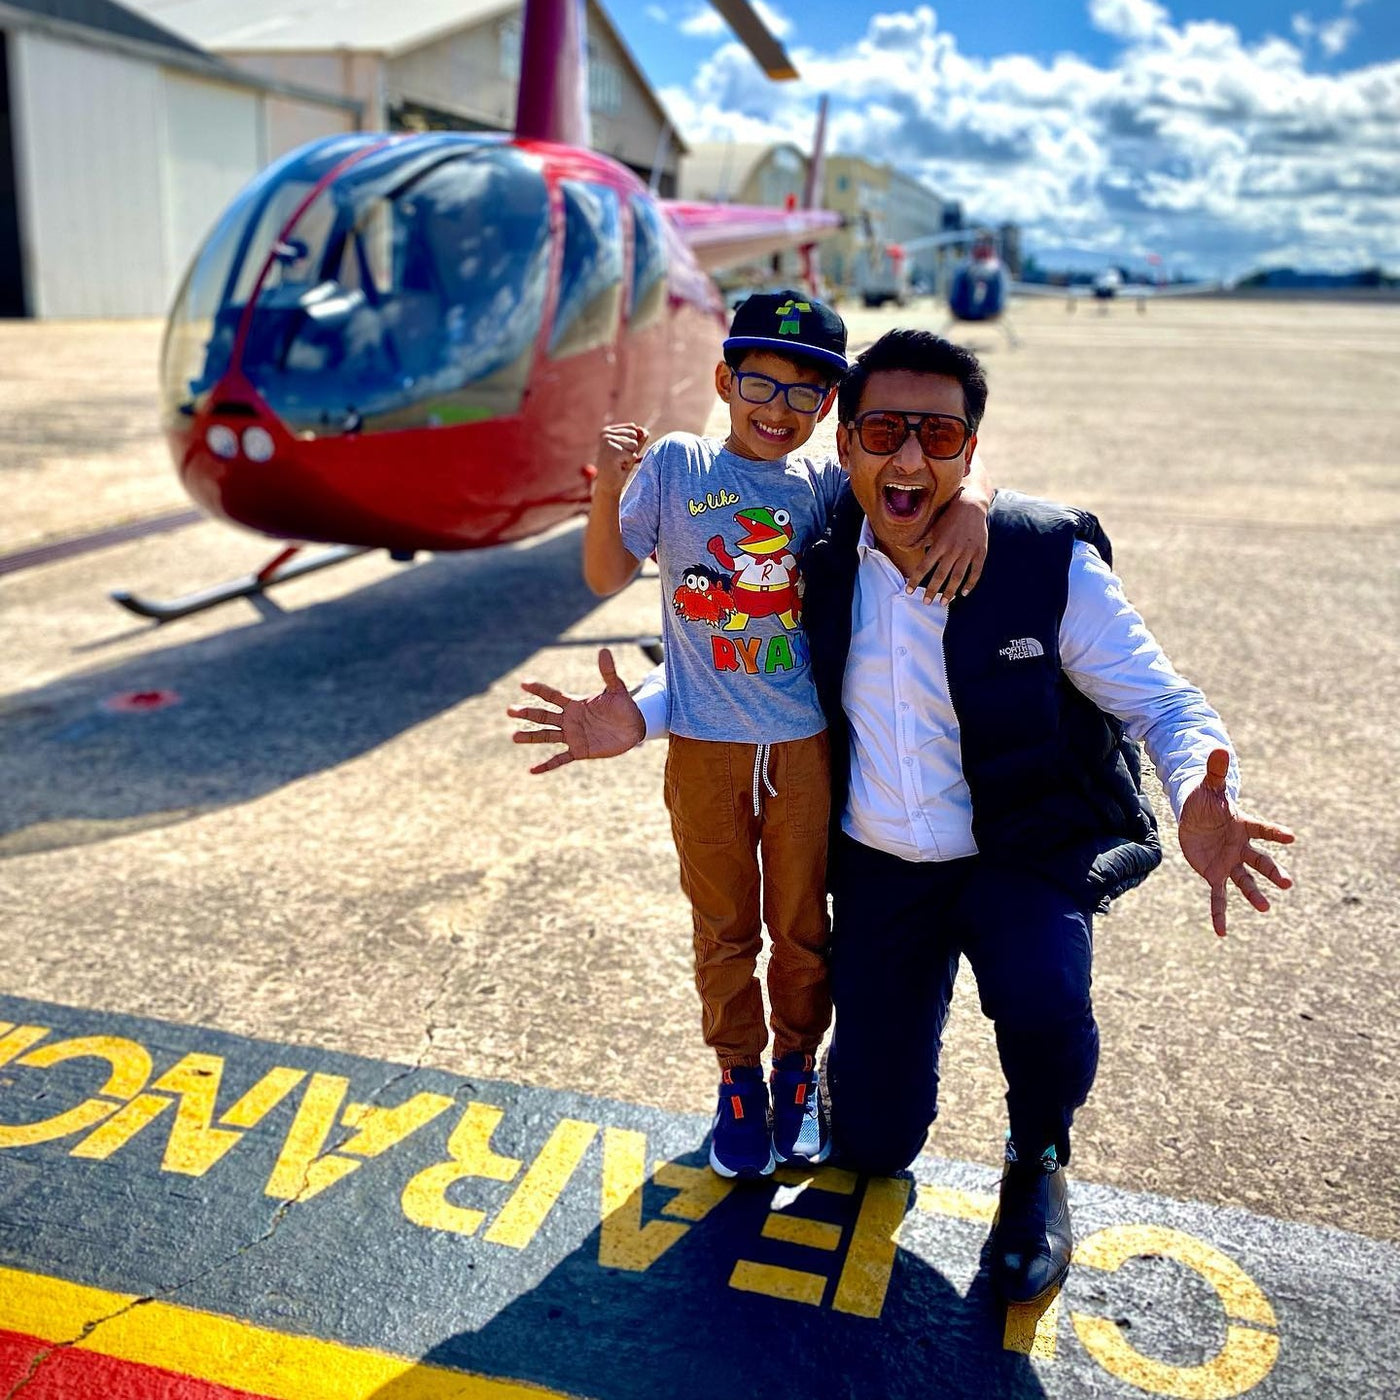 Co-Pilot Birthday Experience Gift for Kids